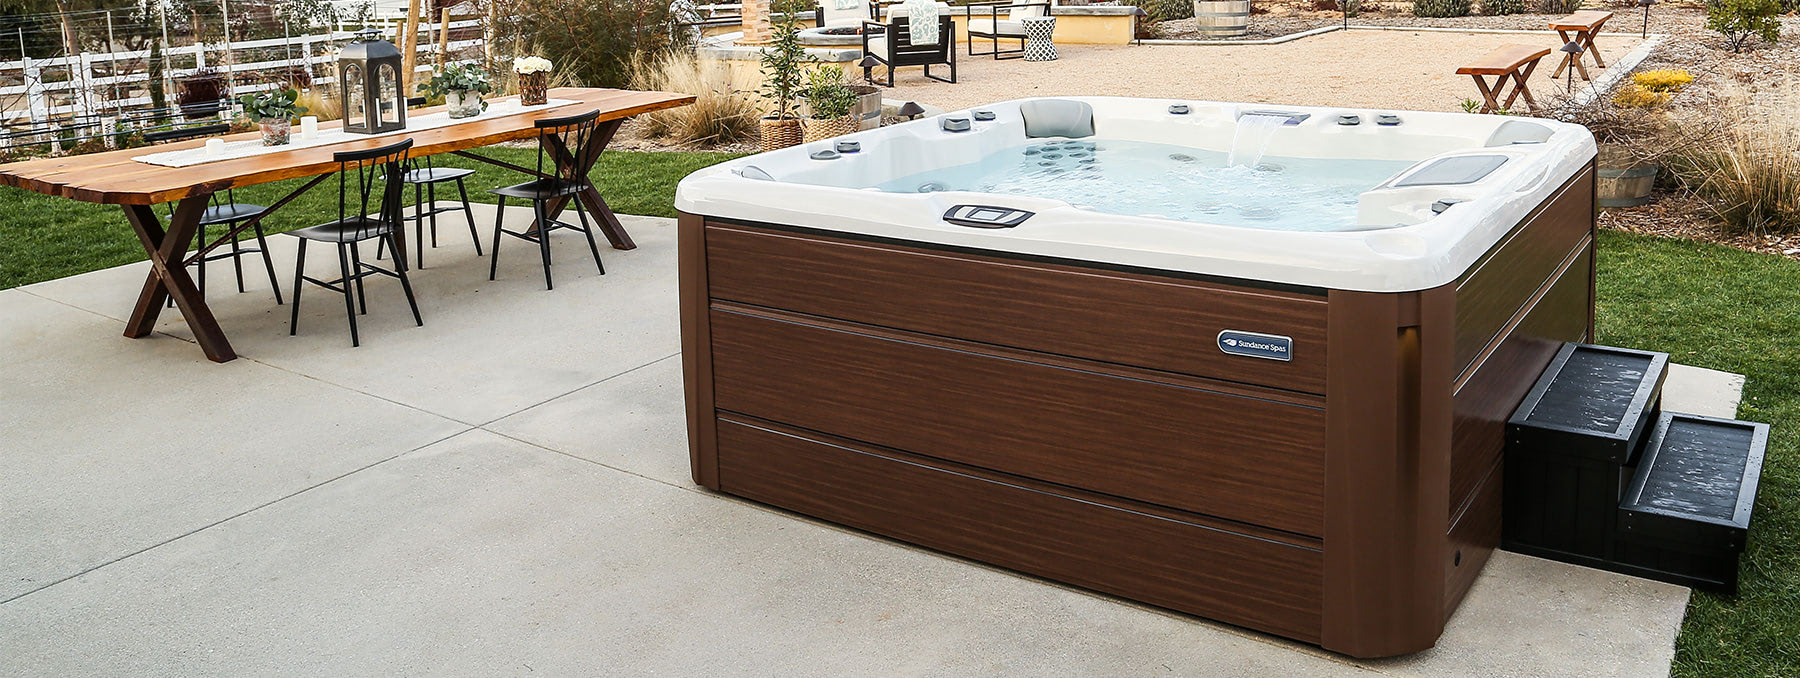 Do you offer hot tub removal?